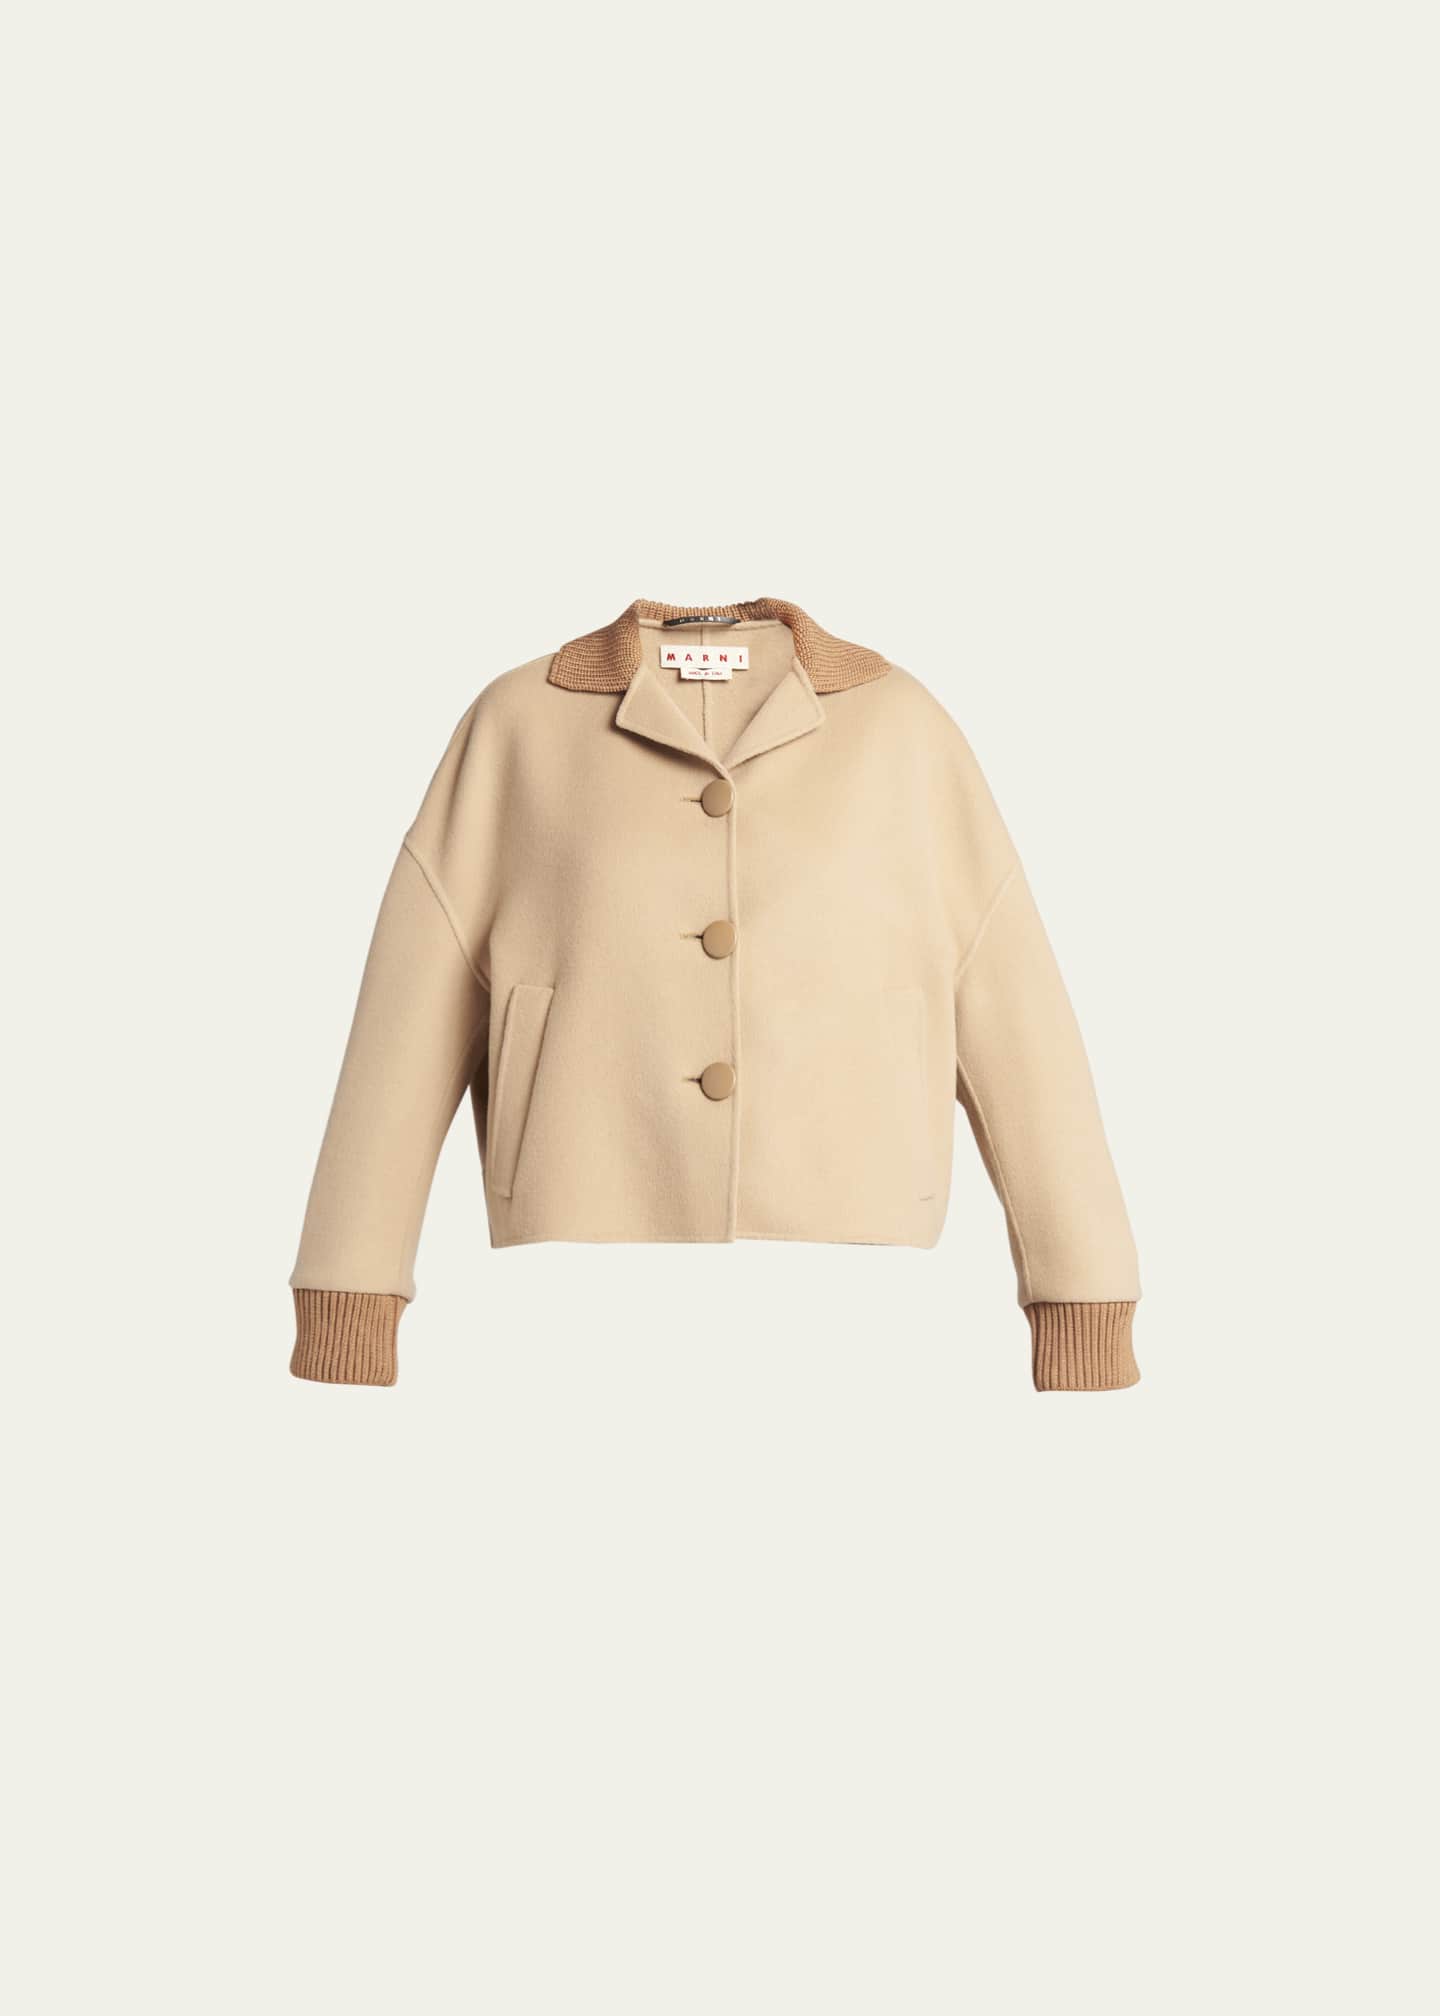 Marni Wool-Blend Short Jacket with Cashmere Trim